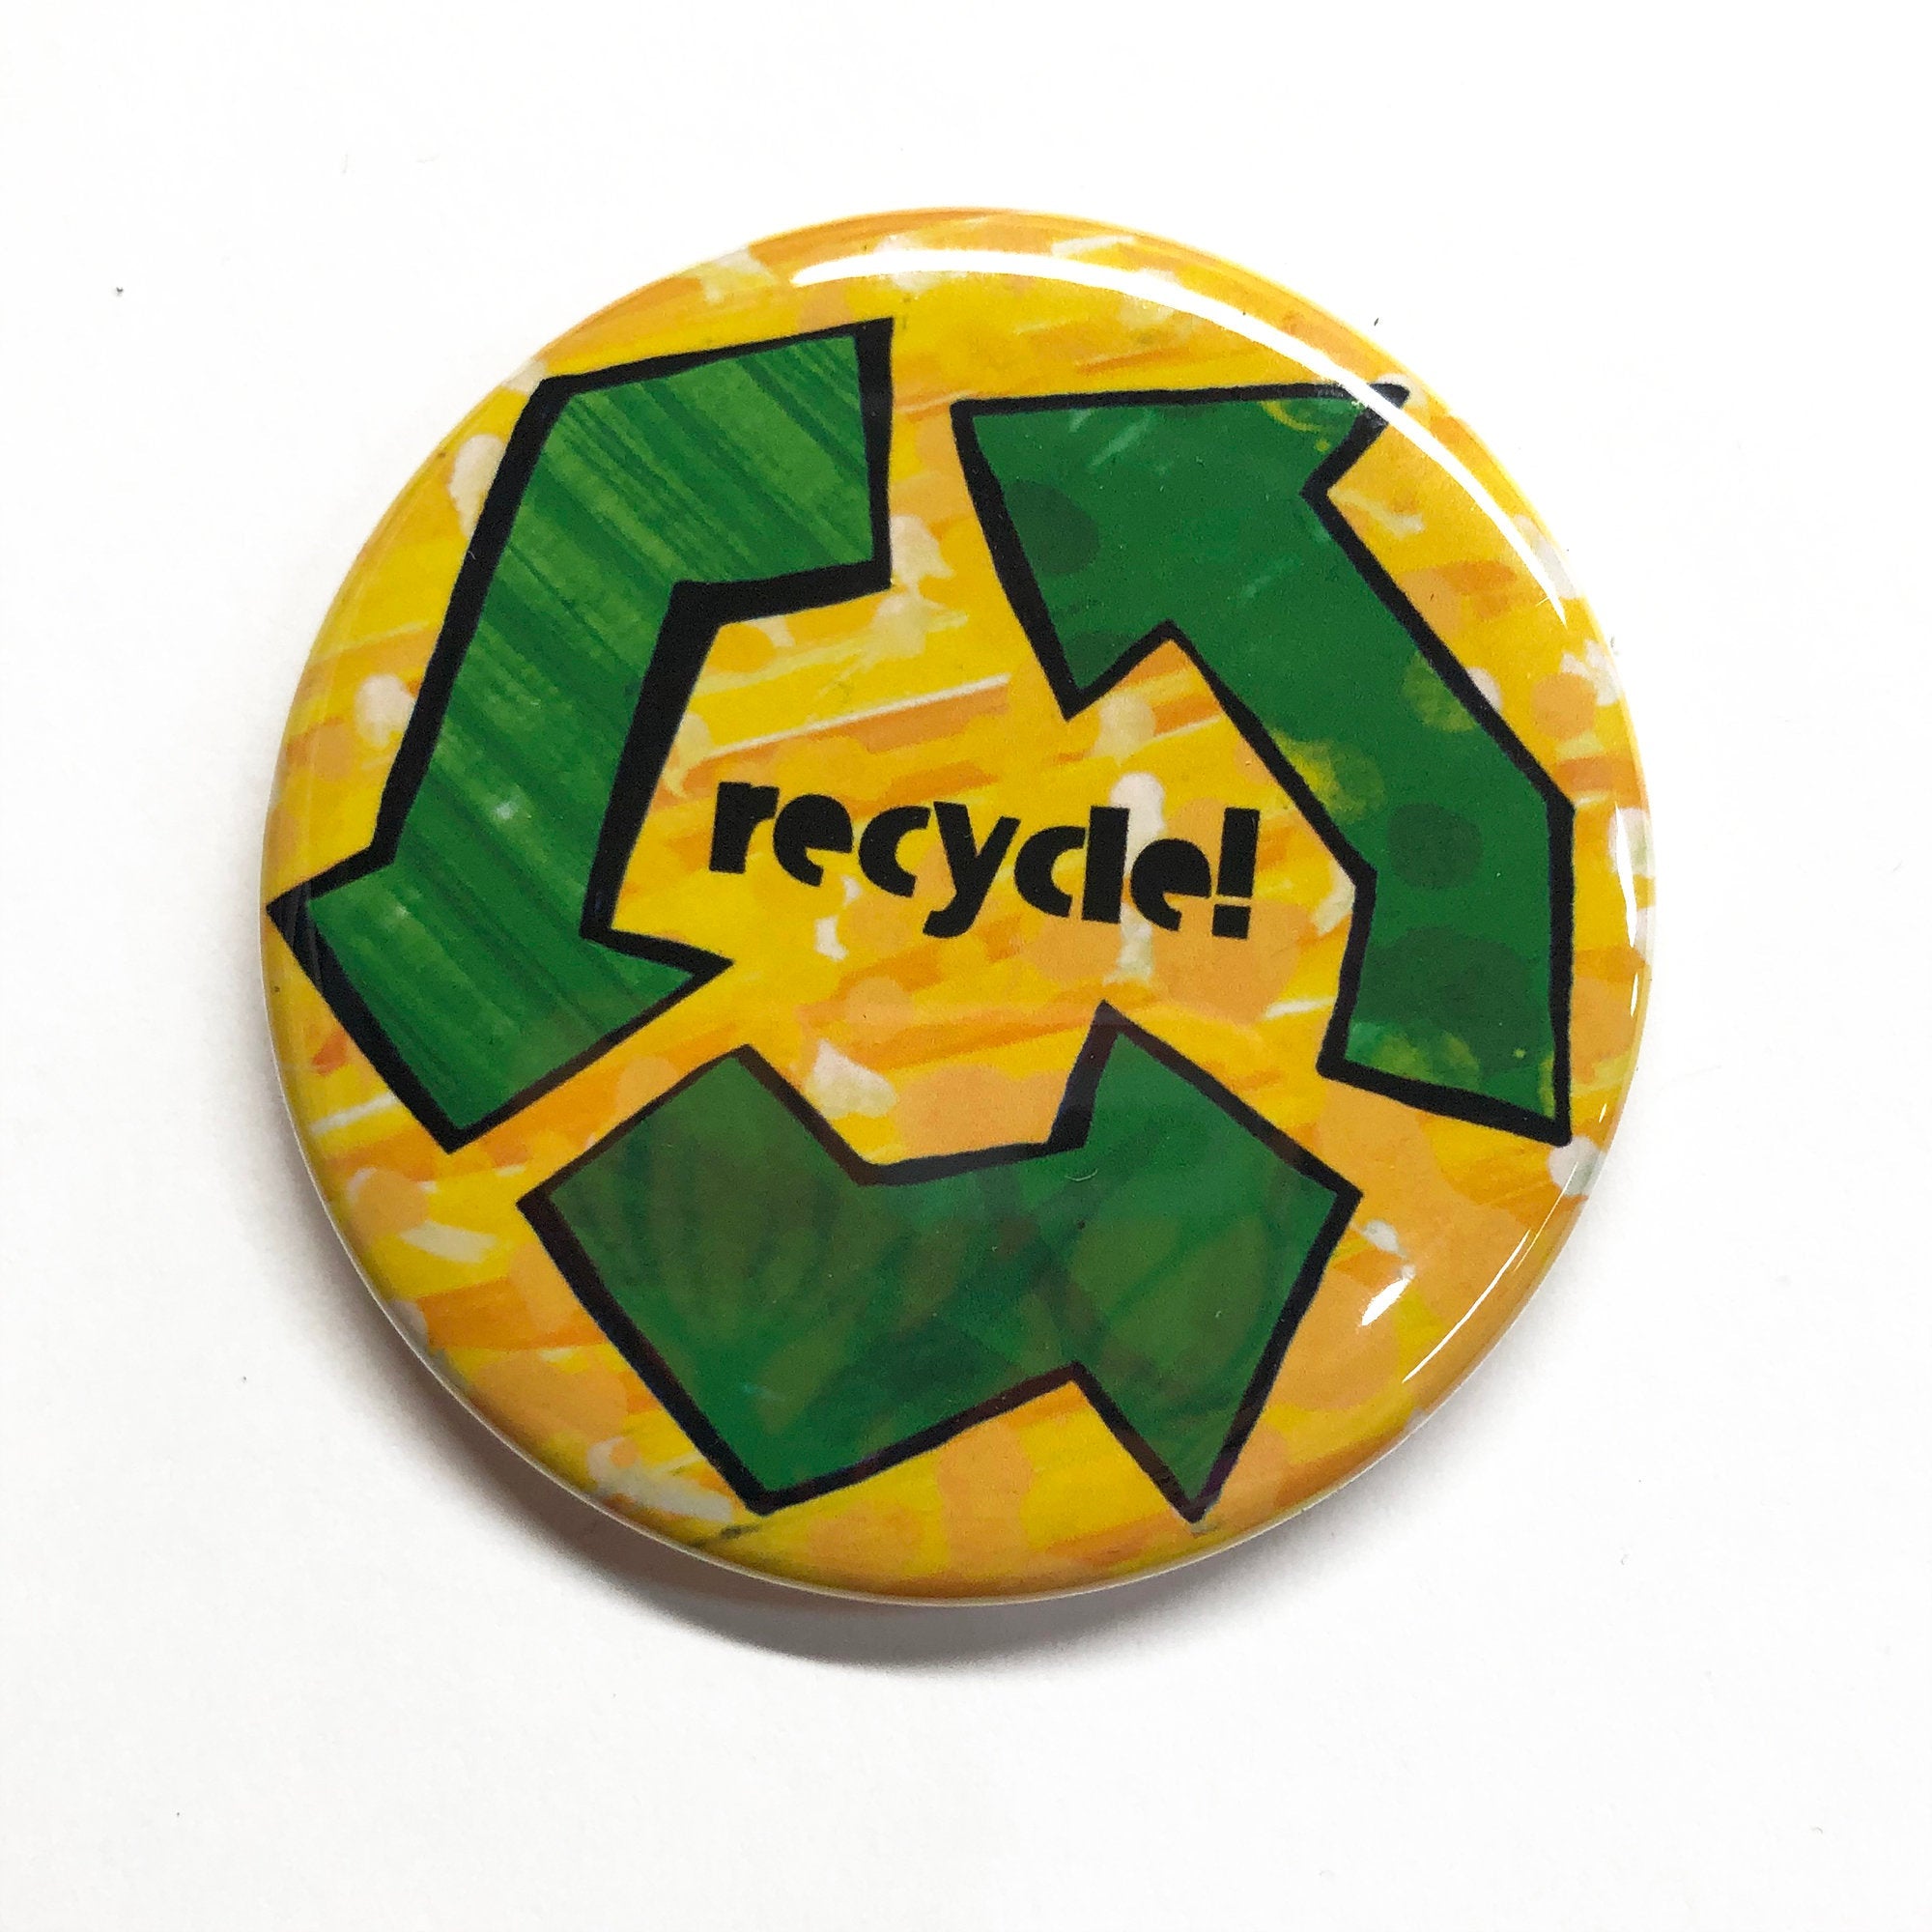 Recycling Pin Back Button or Fridge Magnet